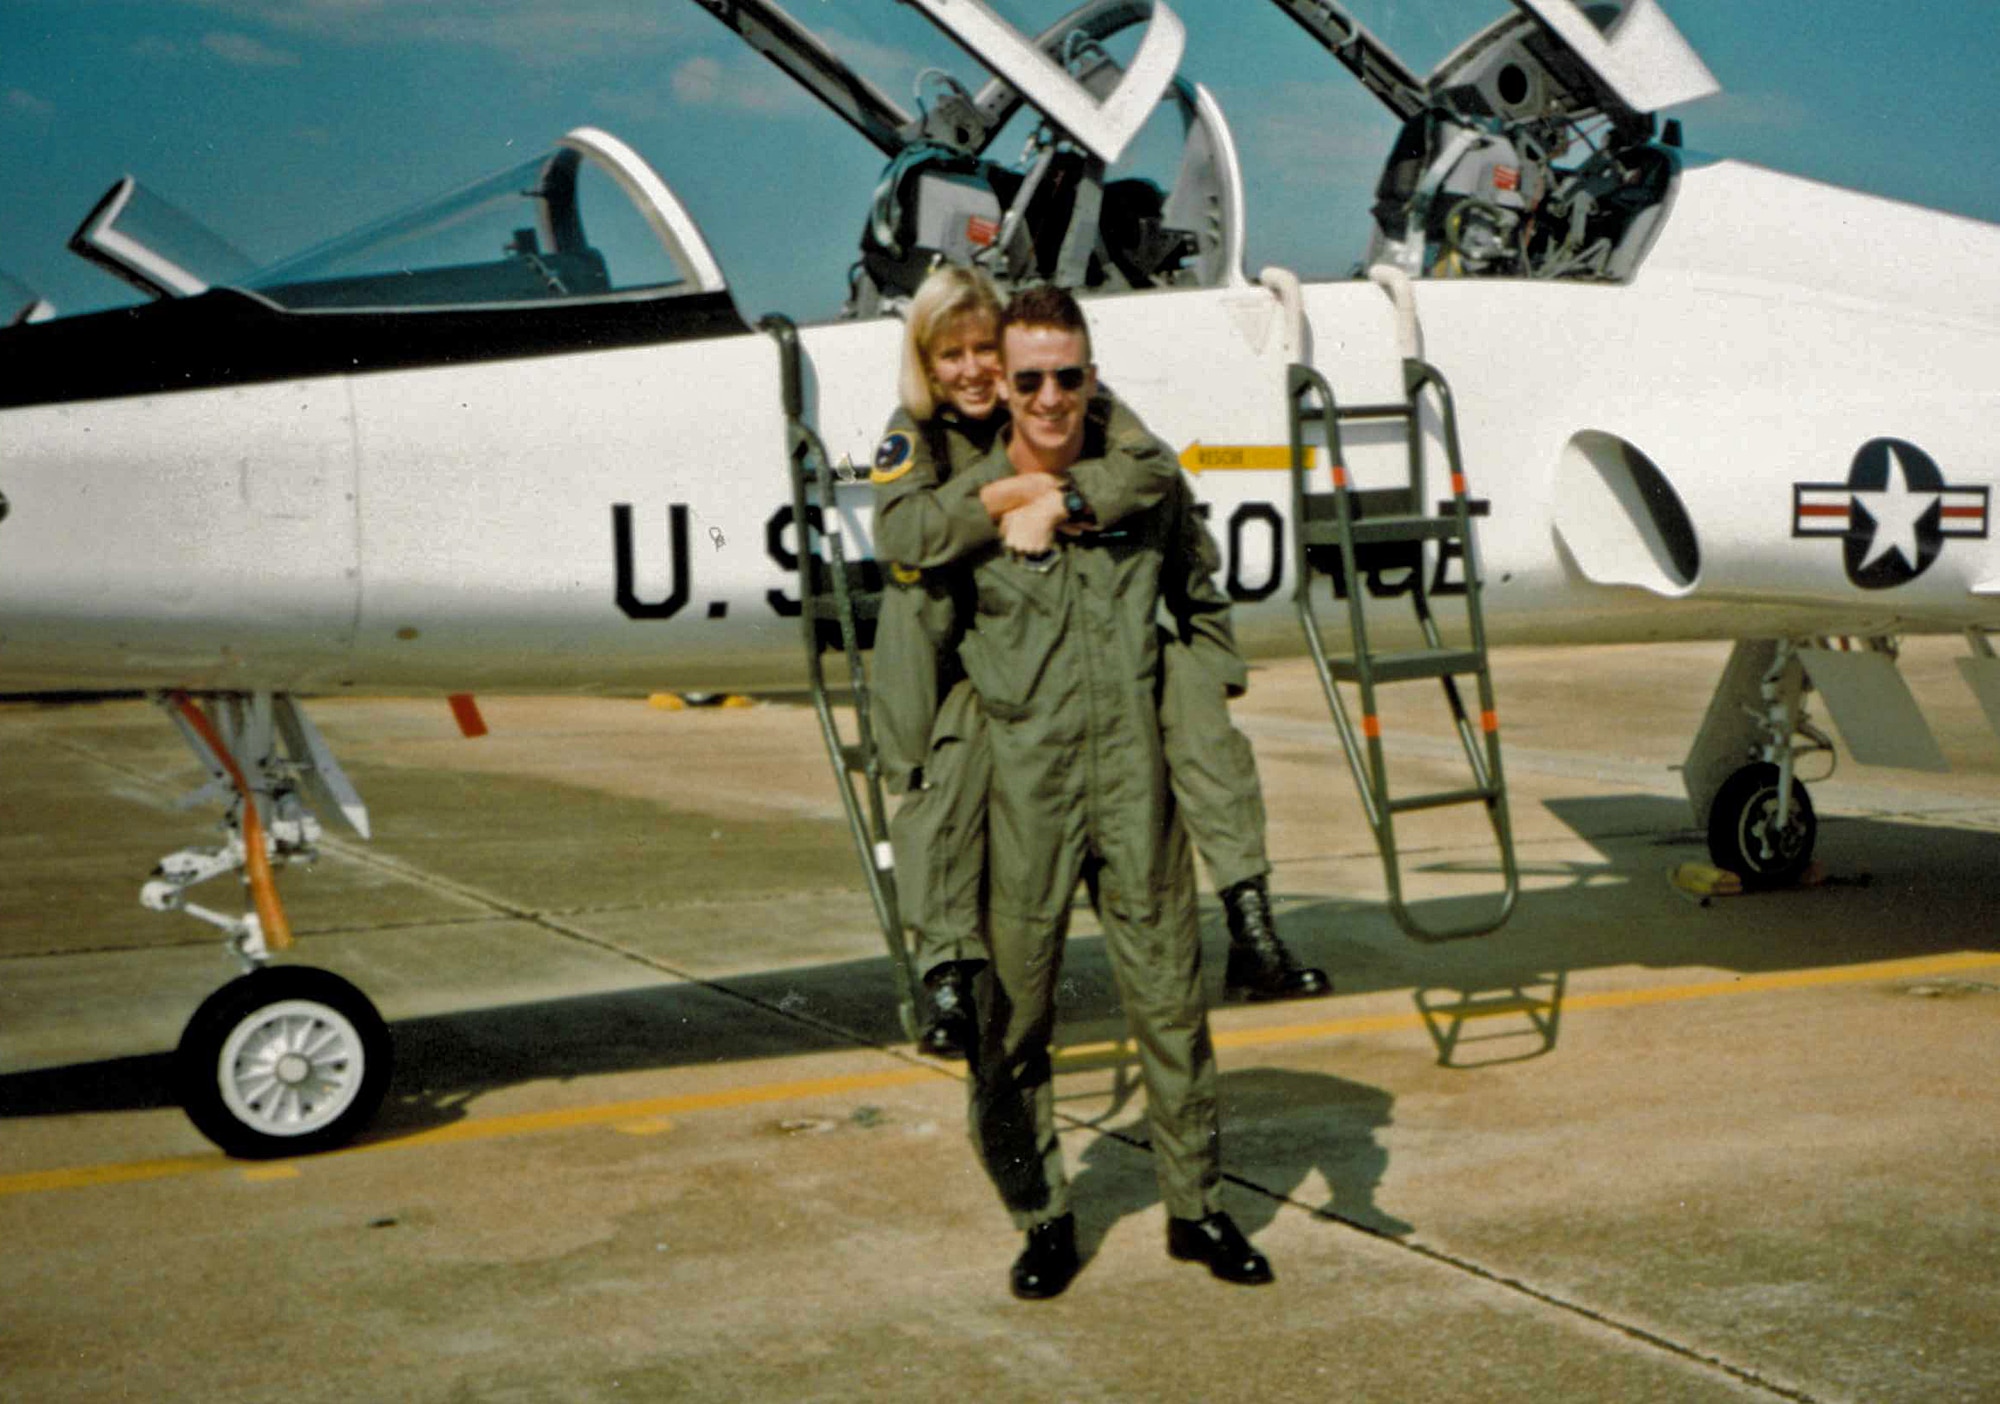 The Lendermans in front of a T-38 aircraft. Col. Laura Lenderman, 375th Air Mobility Wing commander said, “I think one of the main advantages to being a dual military couple is having a mentor who is going through the same things as you are. You have someone who ‘gets it’ right there and who can give you the feedback that you might not get from your peers or subordinates. You need that honest feedback; you need to hear what is not always easy to hear. I’m married to my best friend, and I have my biggest cheerleader and coach right beside me.”